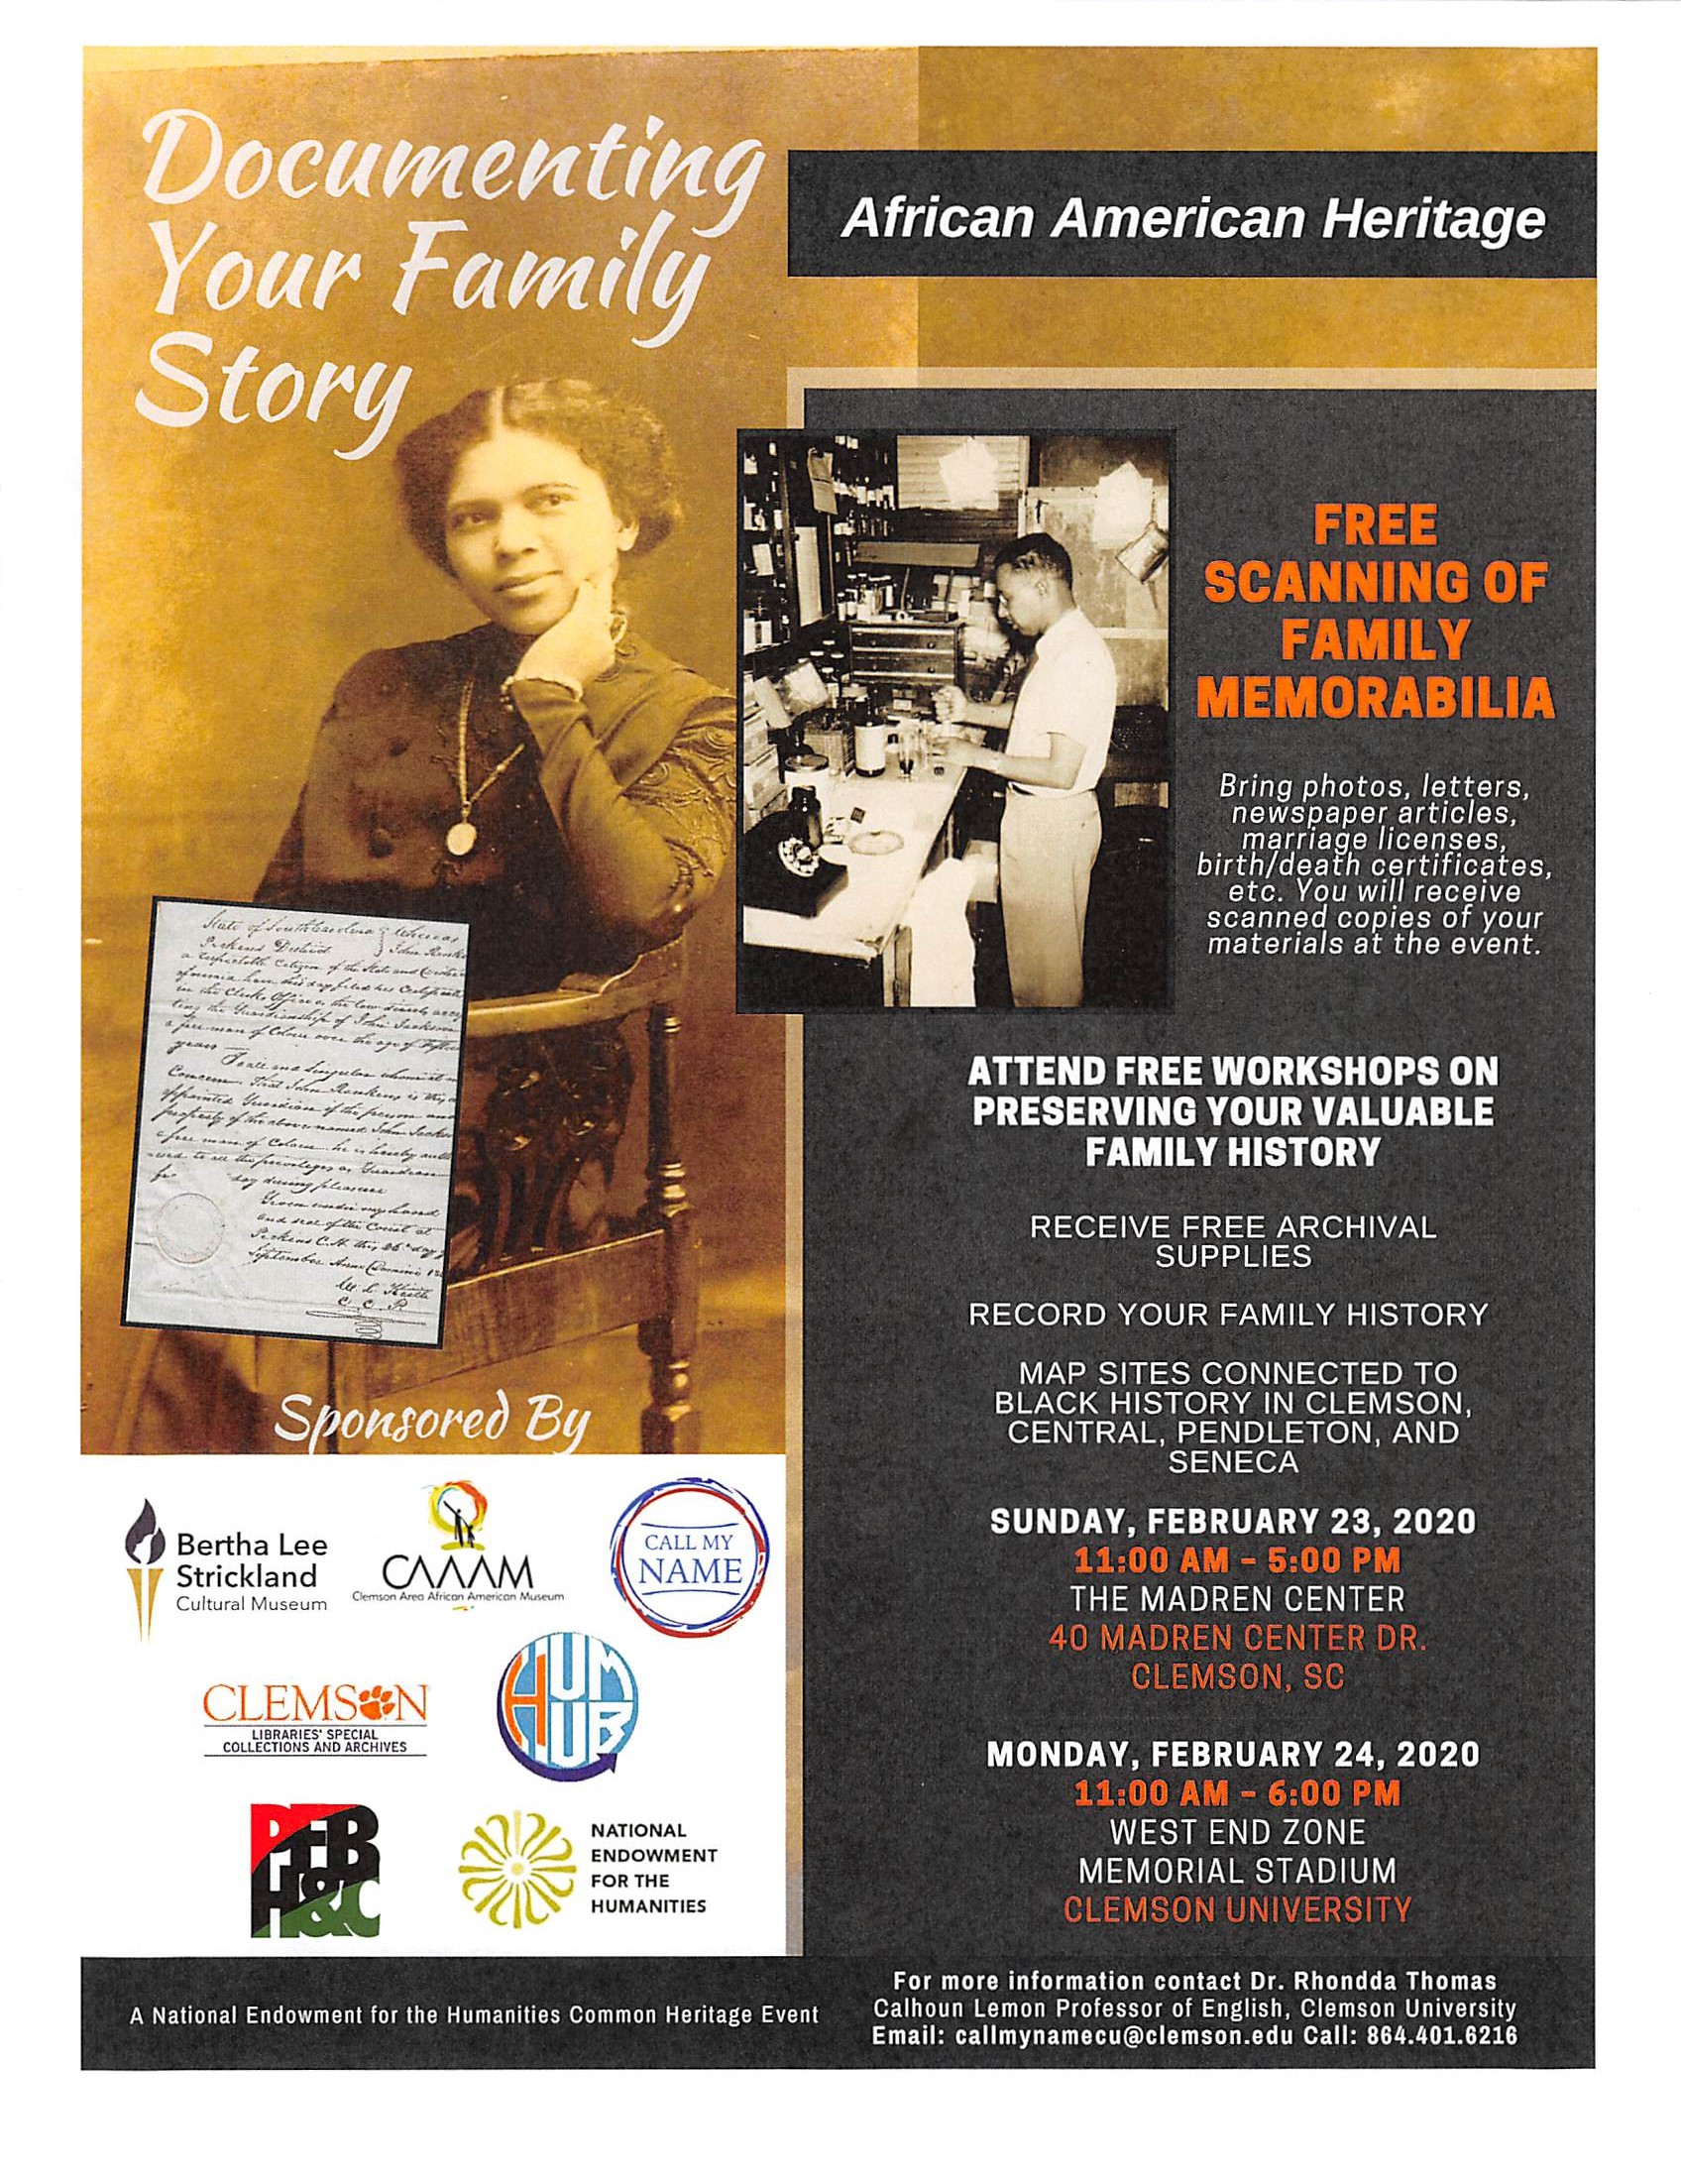 Documenting Your Family Story; Free Scanning of Family Memorabilia at CAAAM